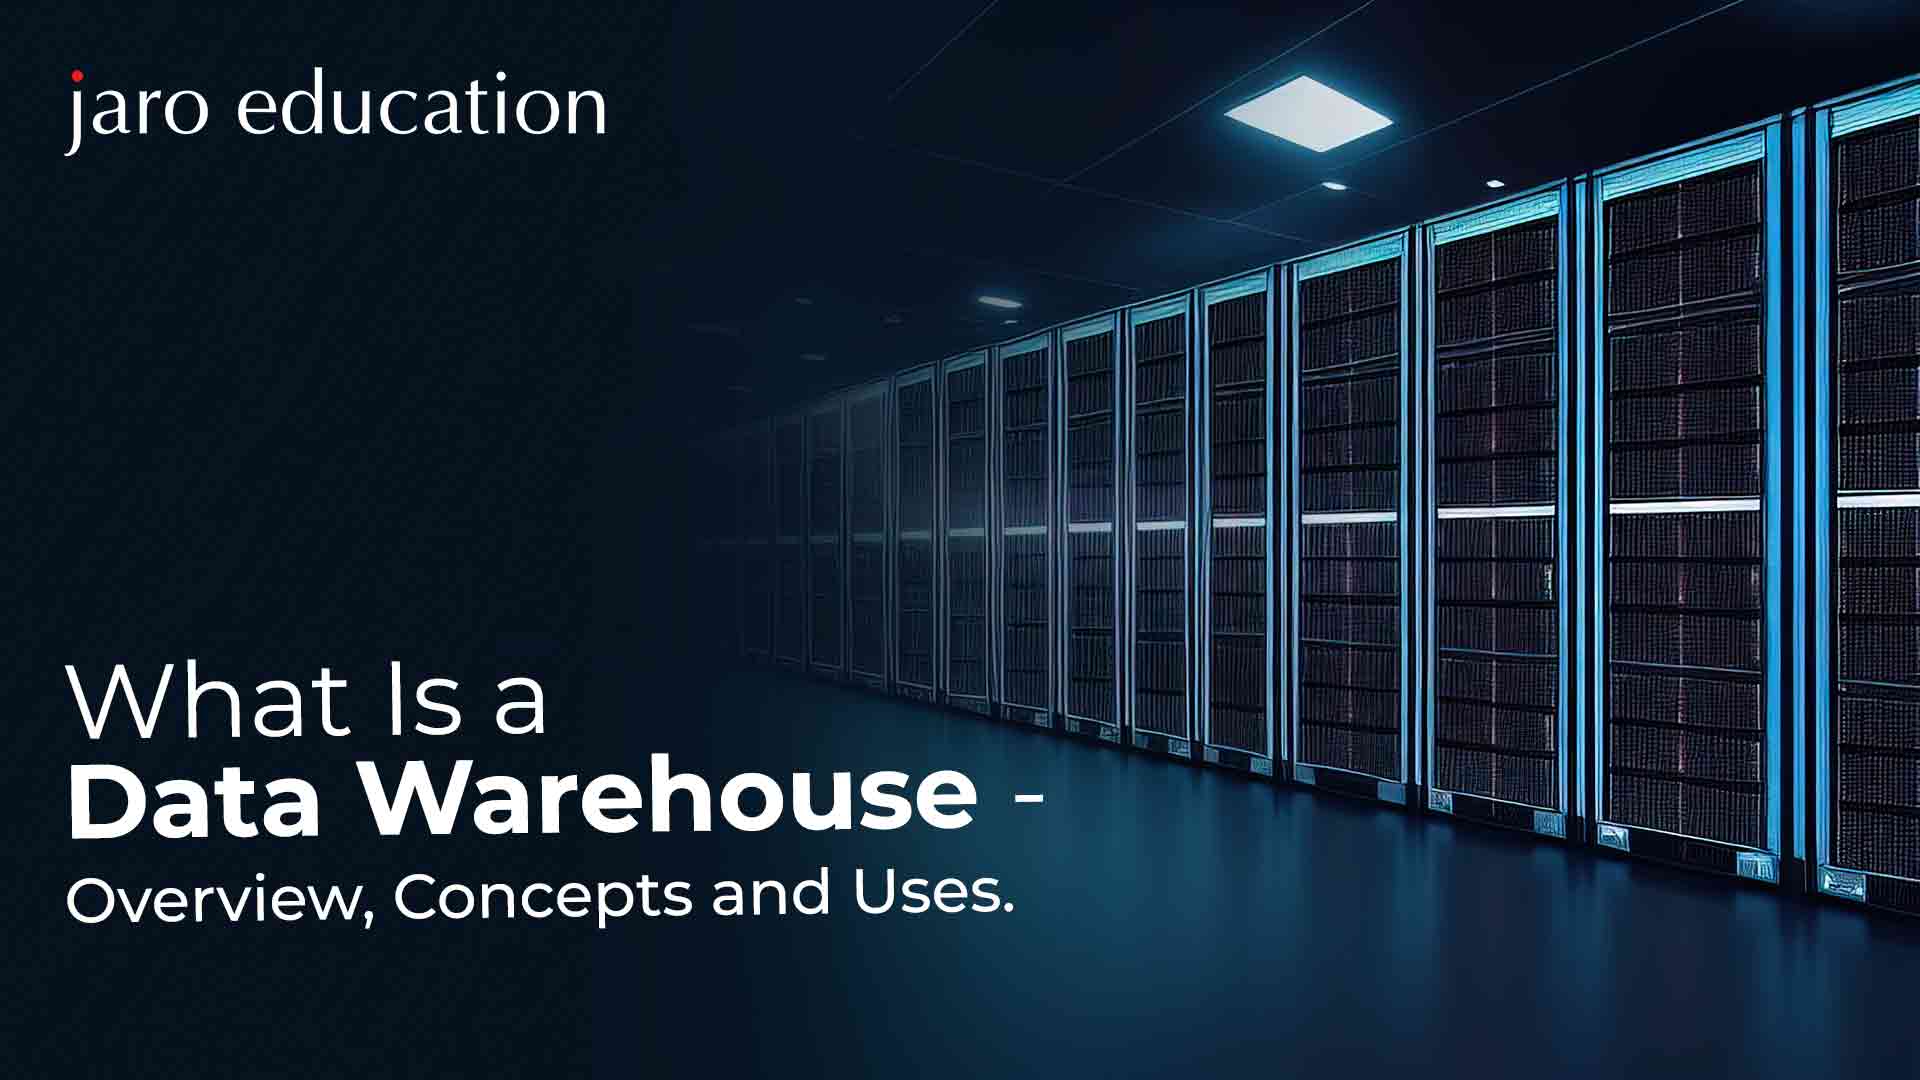 What Is A Data Warehouse Overview, Concepts And Uses